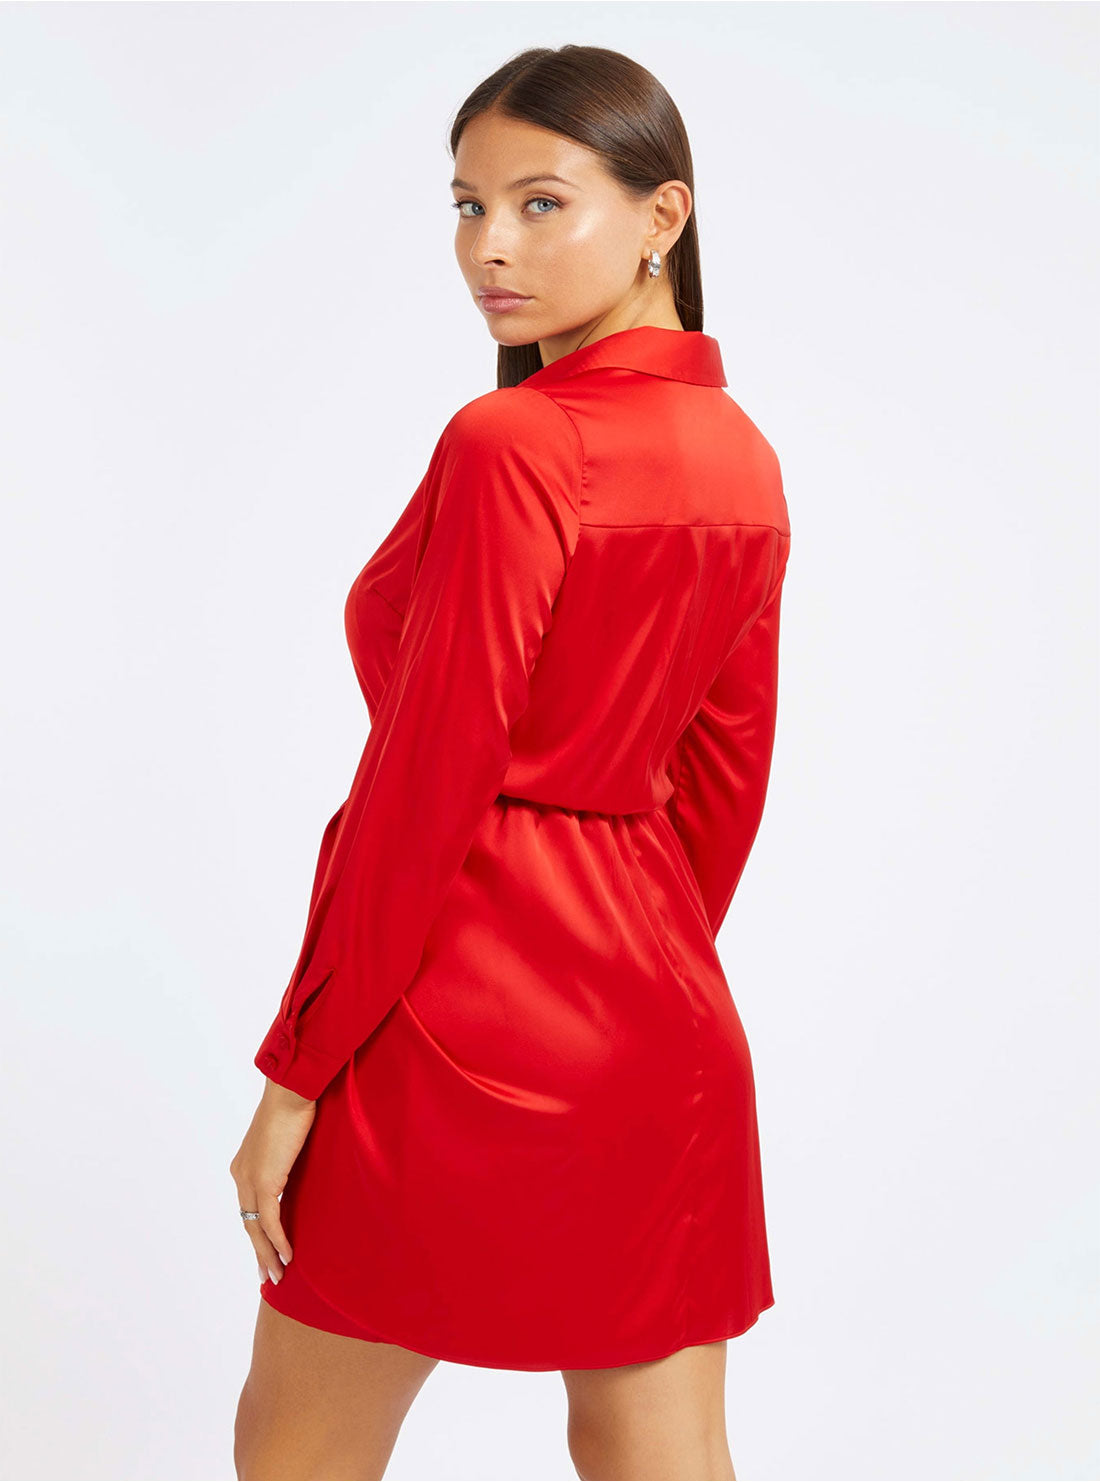 GUESS Bight Red Alya Dress side view